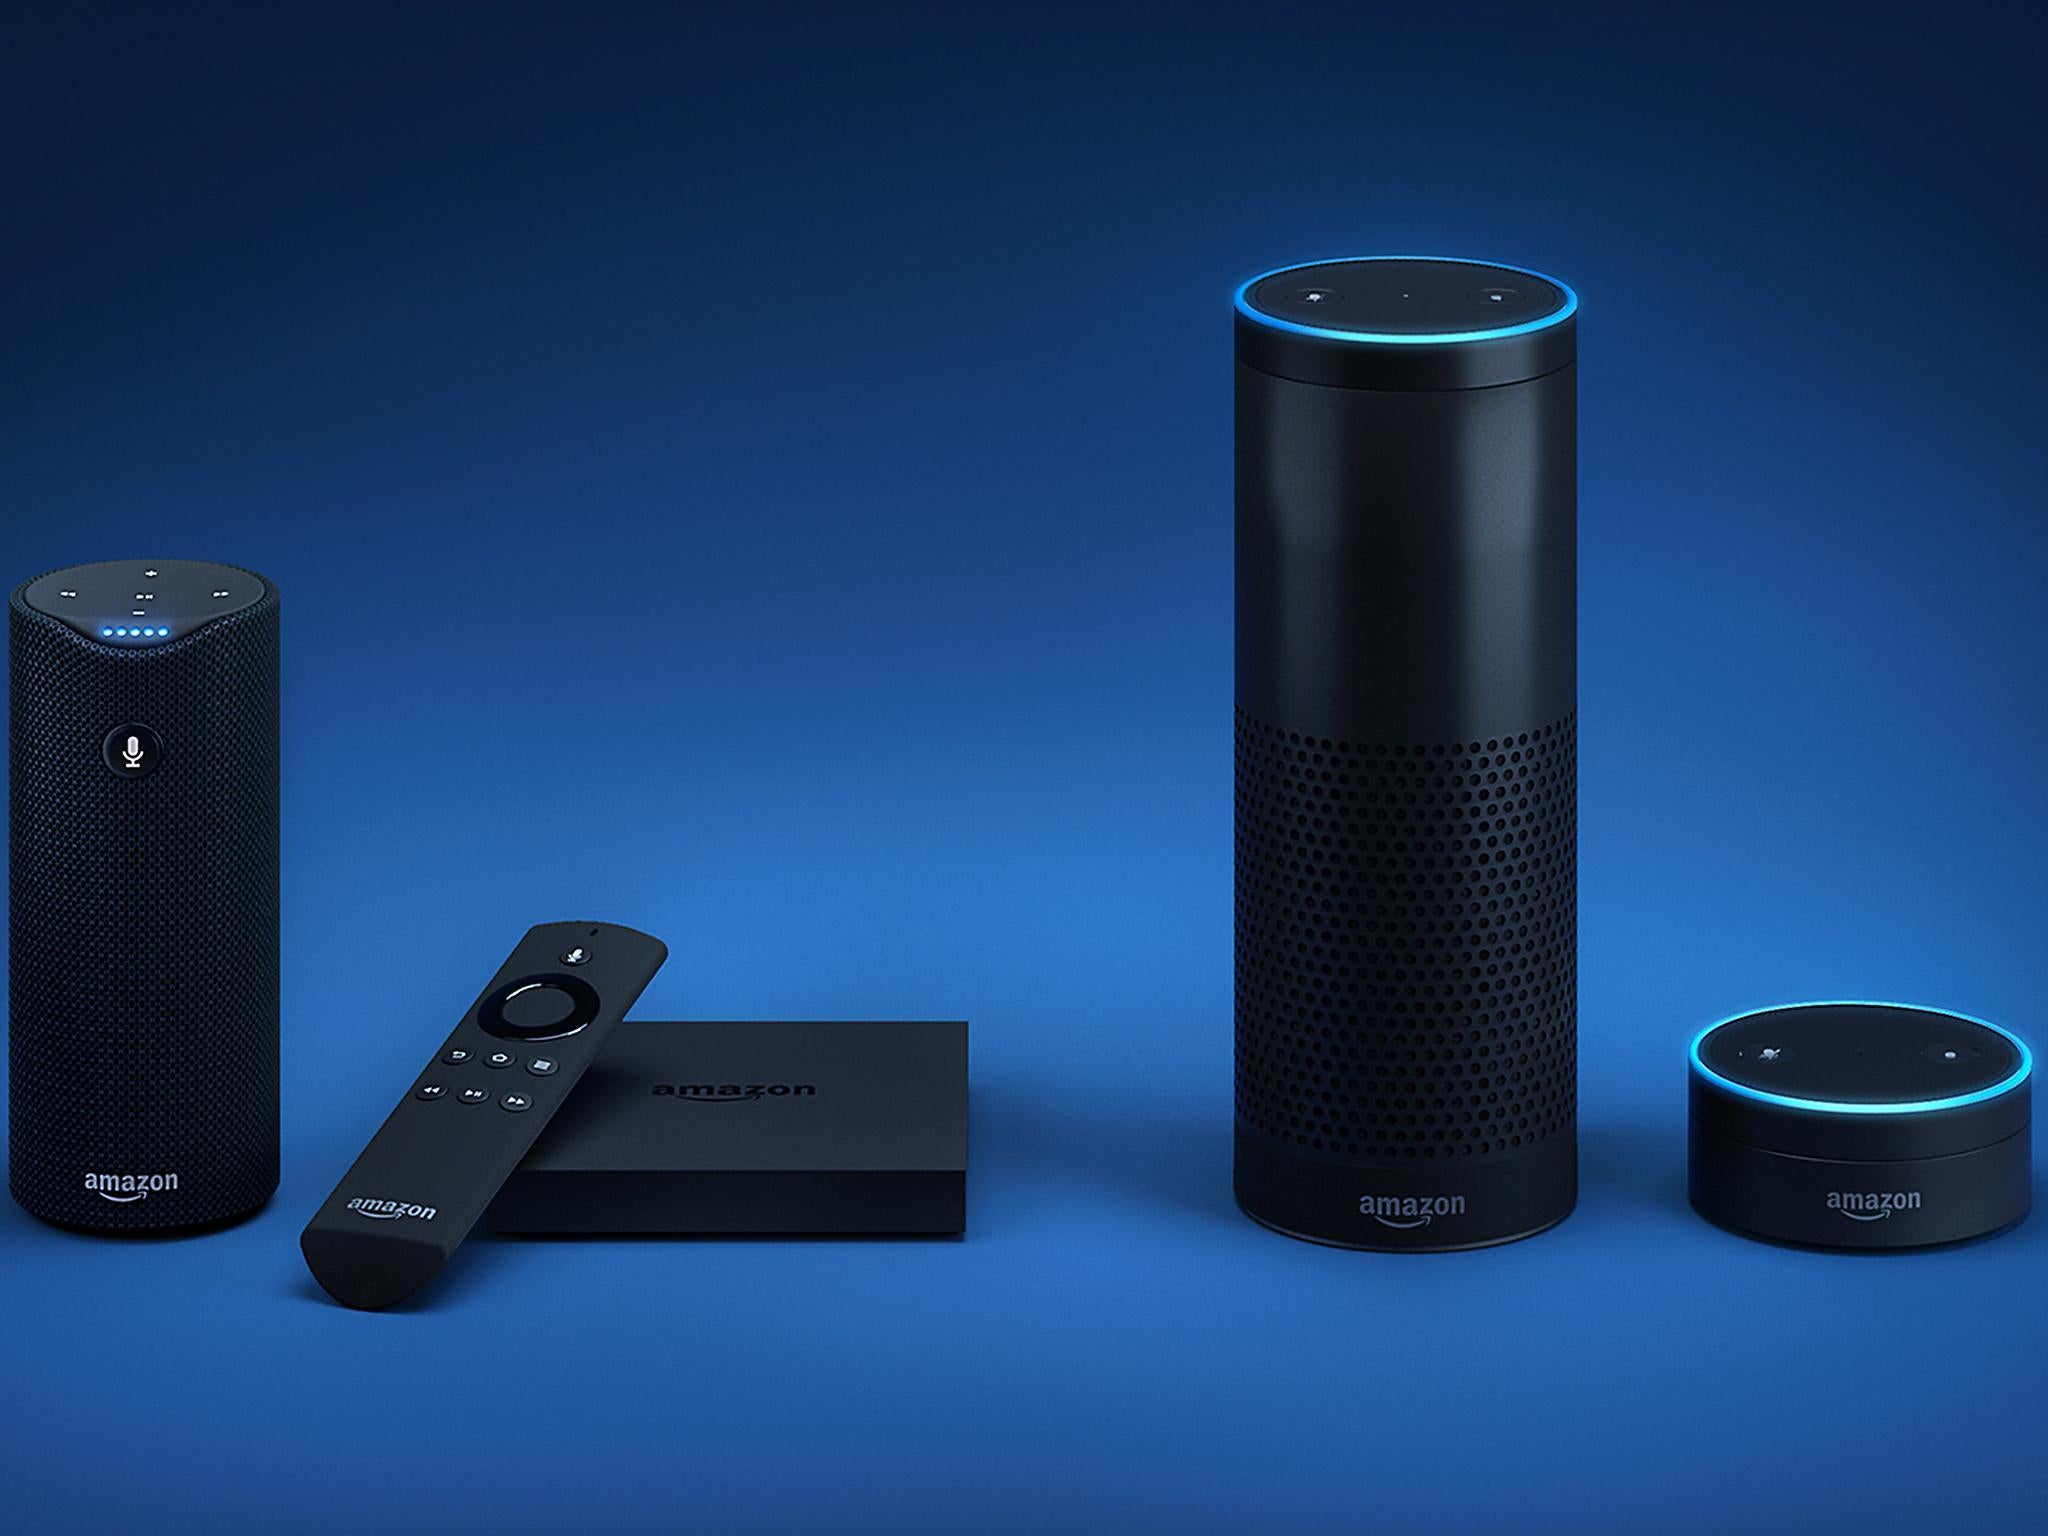 Alexa arrived in a range of different Amazon products, including its smart speakers